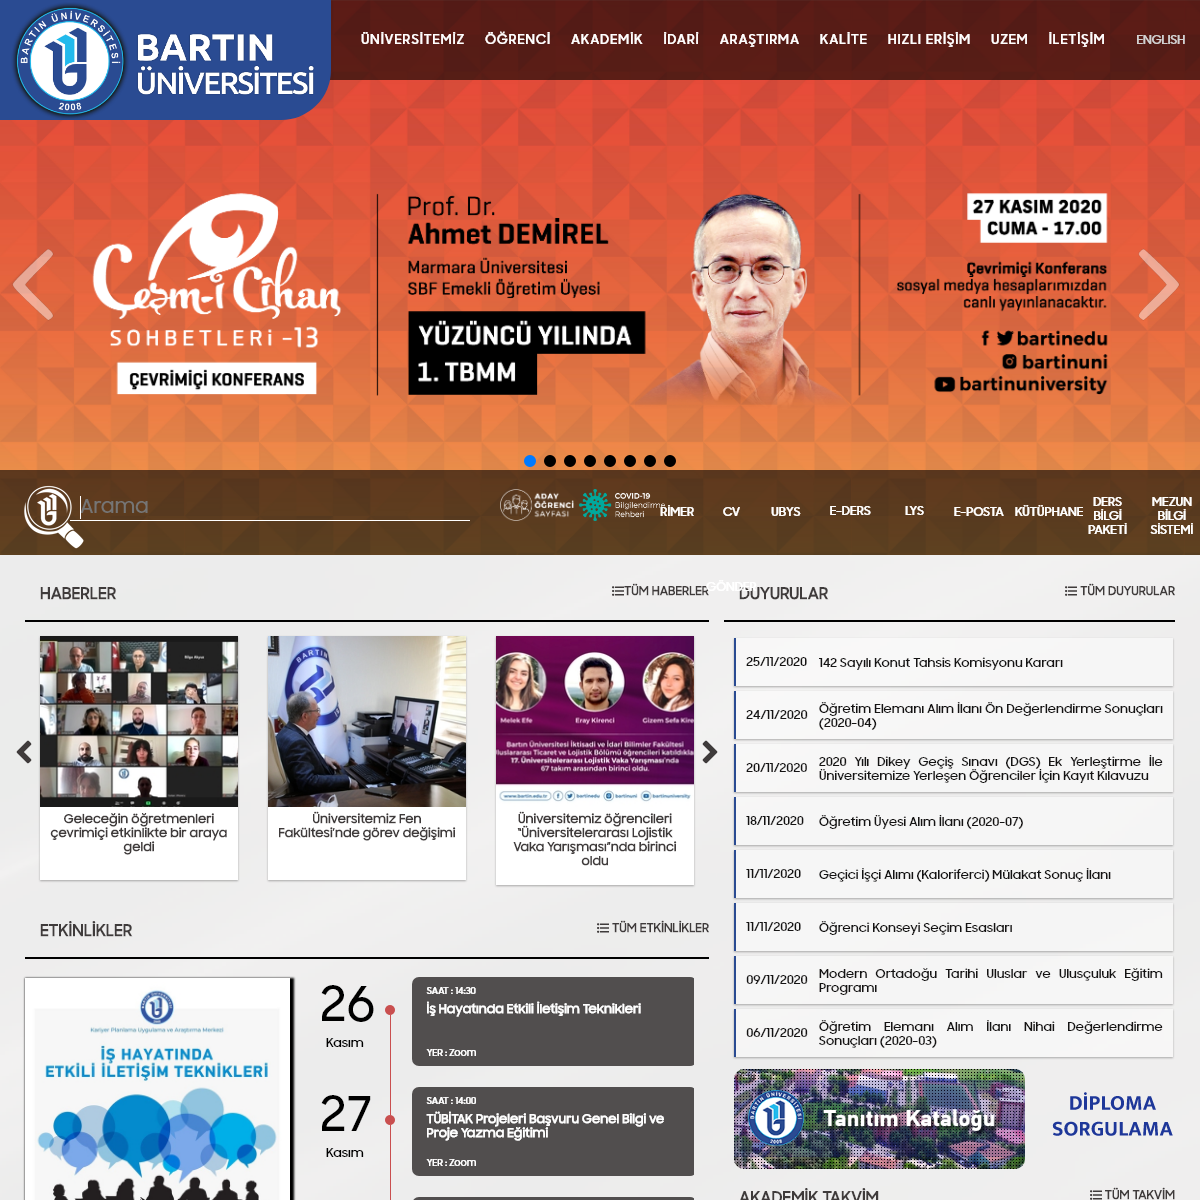 A complete backup of bartin.edu.tr